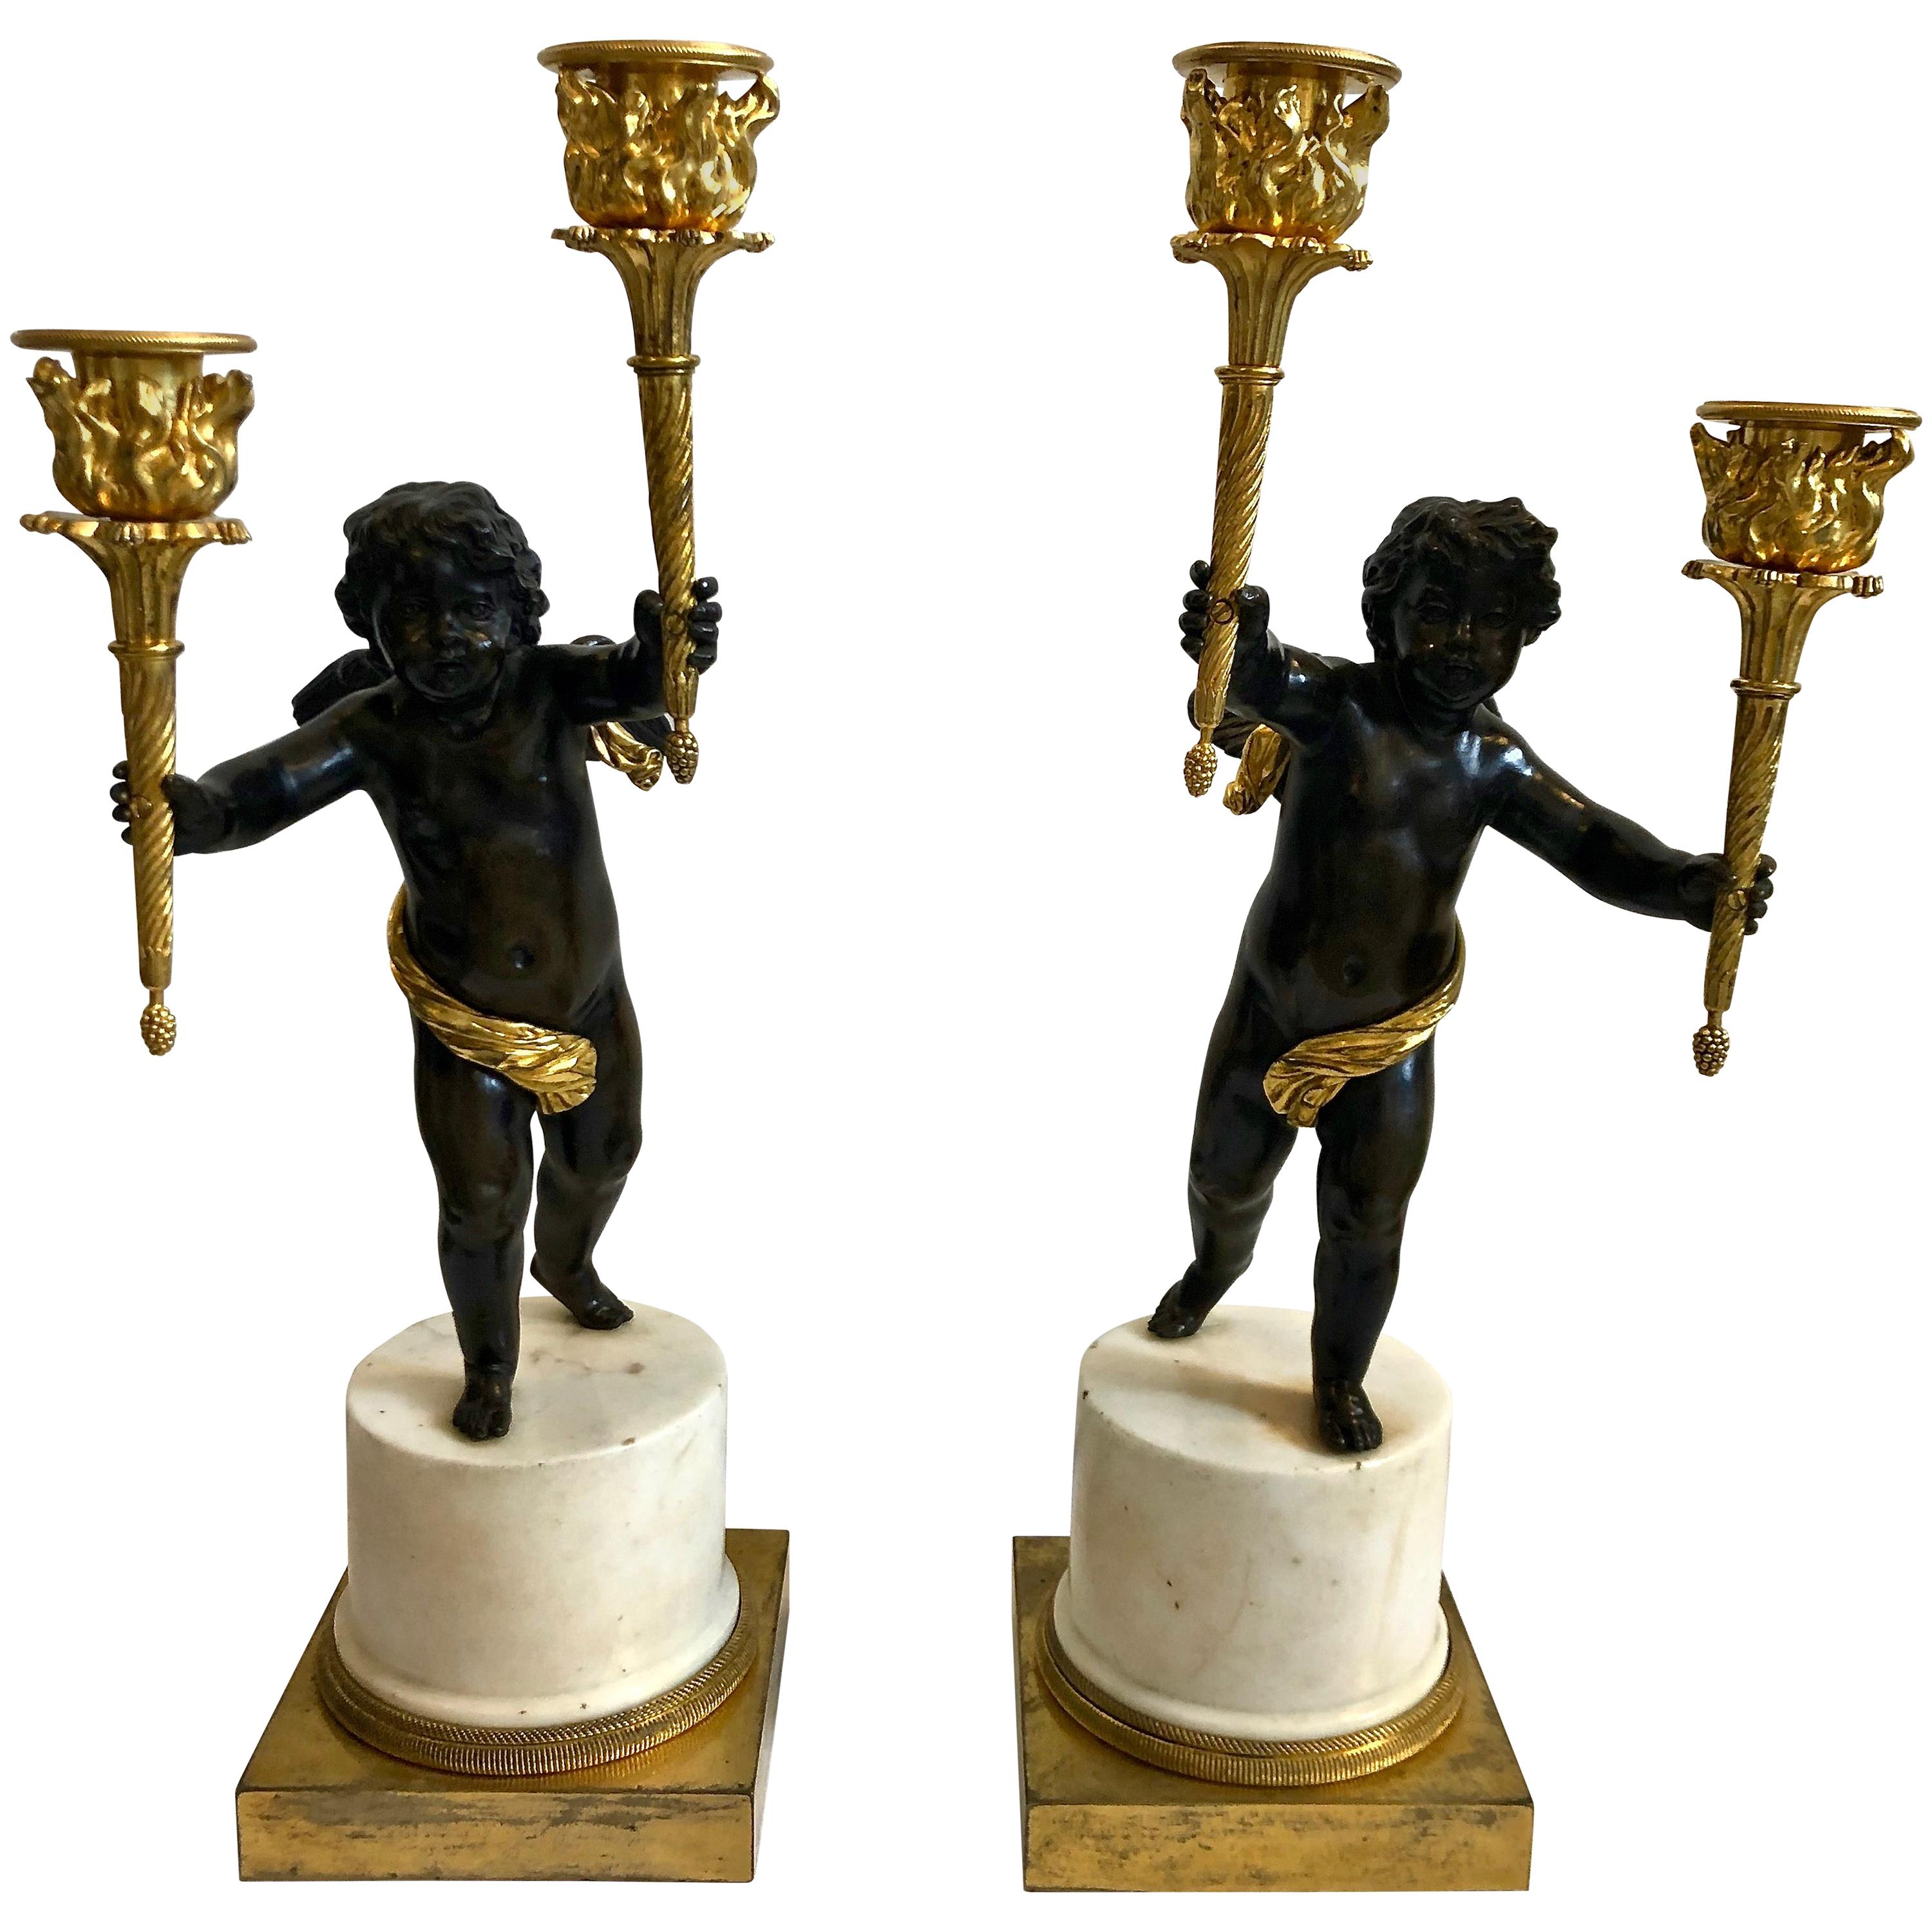 Pair of French Candelabra, Late 18th Century